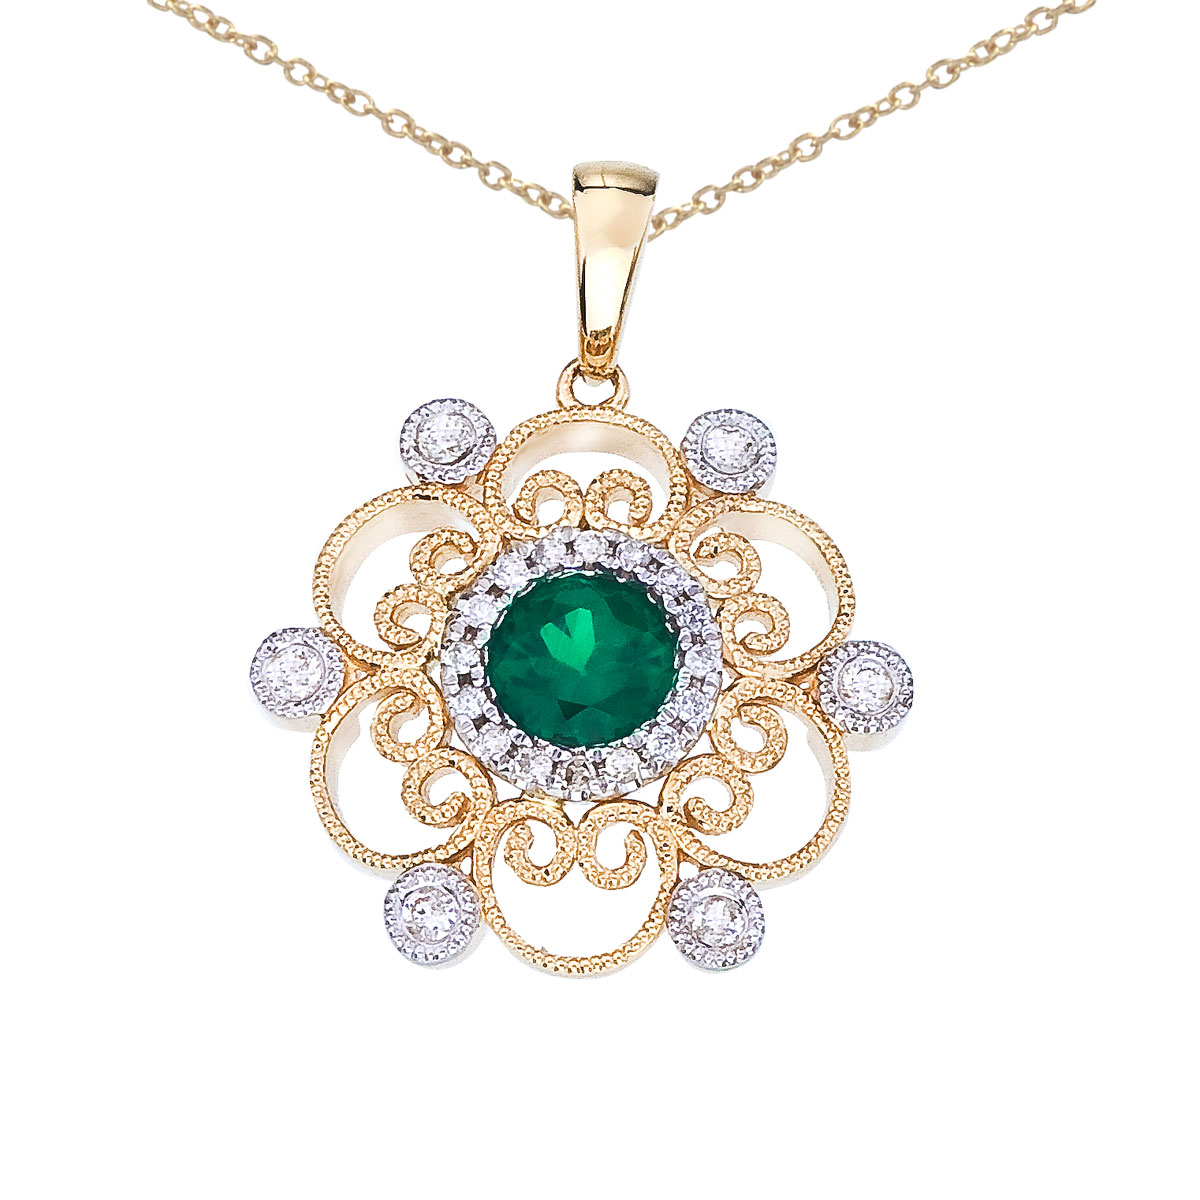 Sophisticated 14k two-toned gold pendant containing a vibrant 5 mm round emerald and .13 ct diamo...